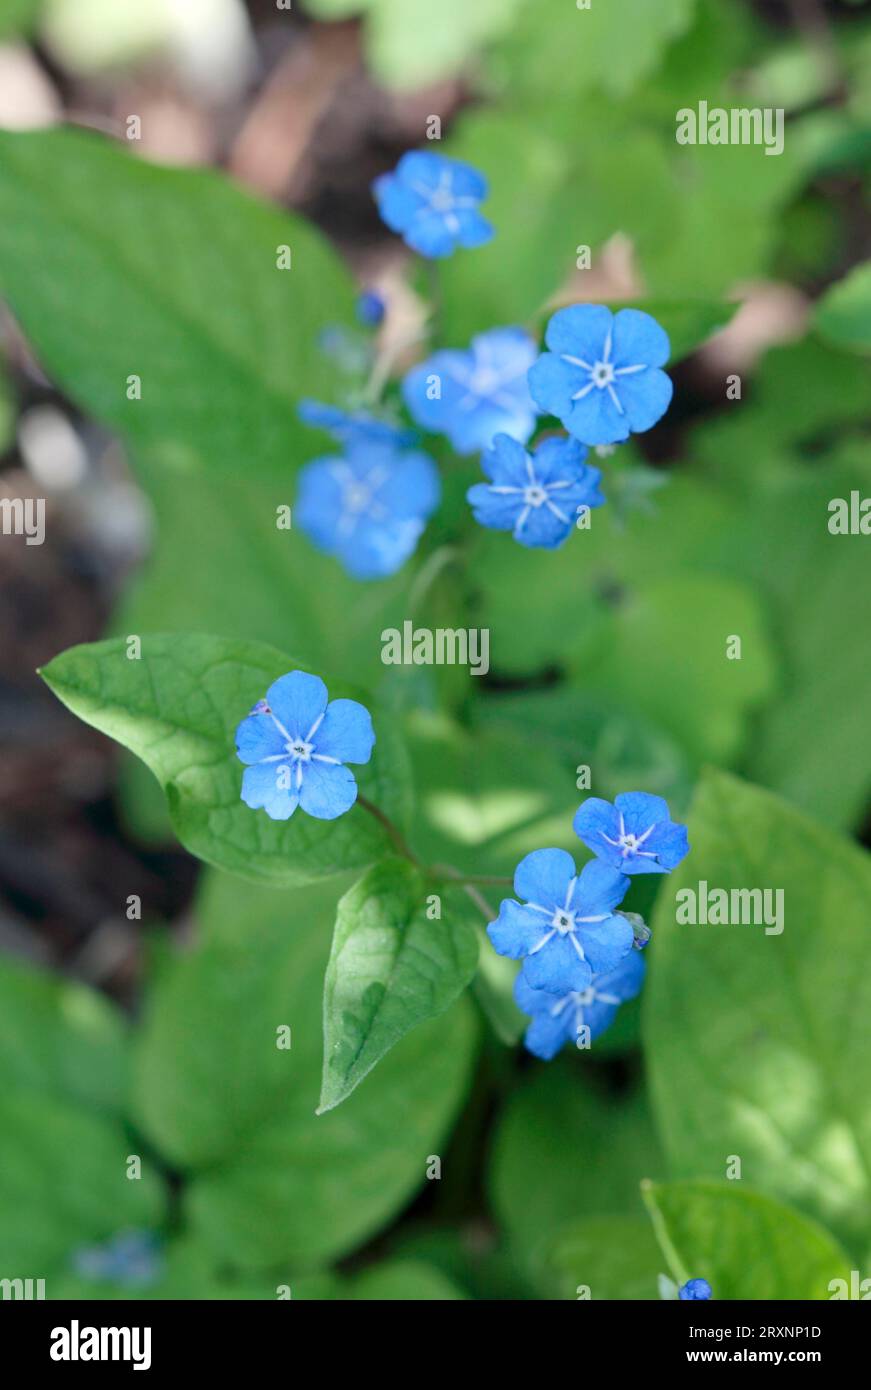 Creeping navelwort (Omphalodes verna), Forget-me-not, Forget-me-not, Forget-me-not Stock Photo